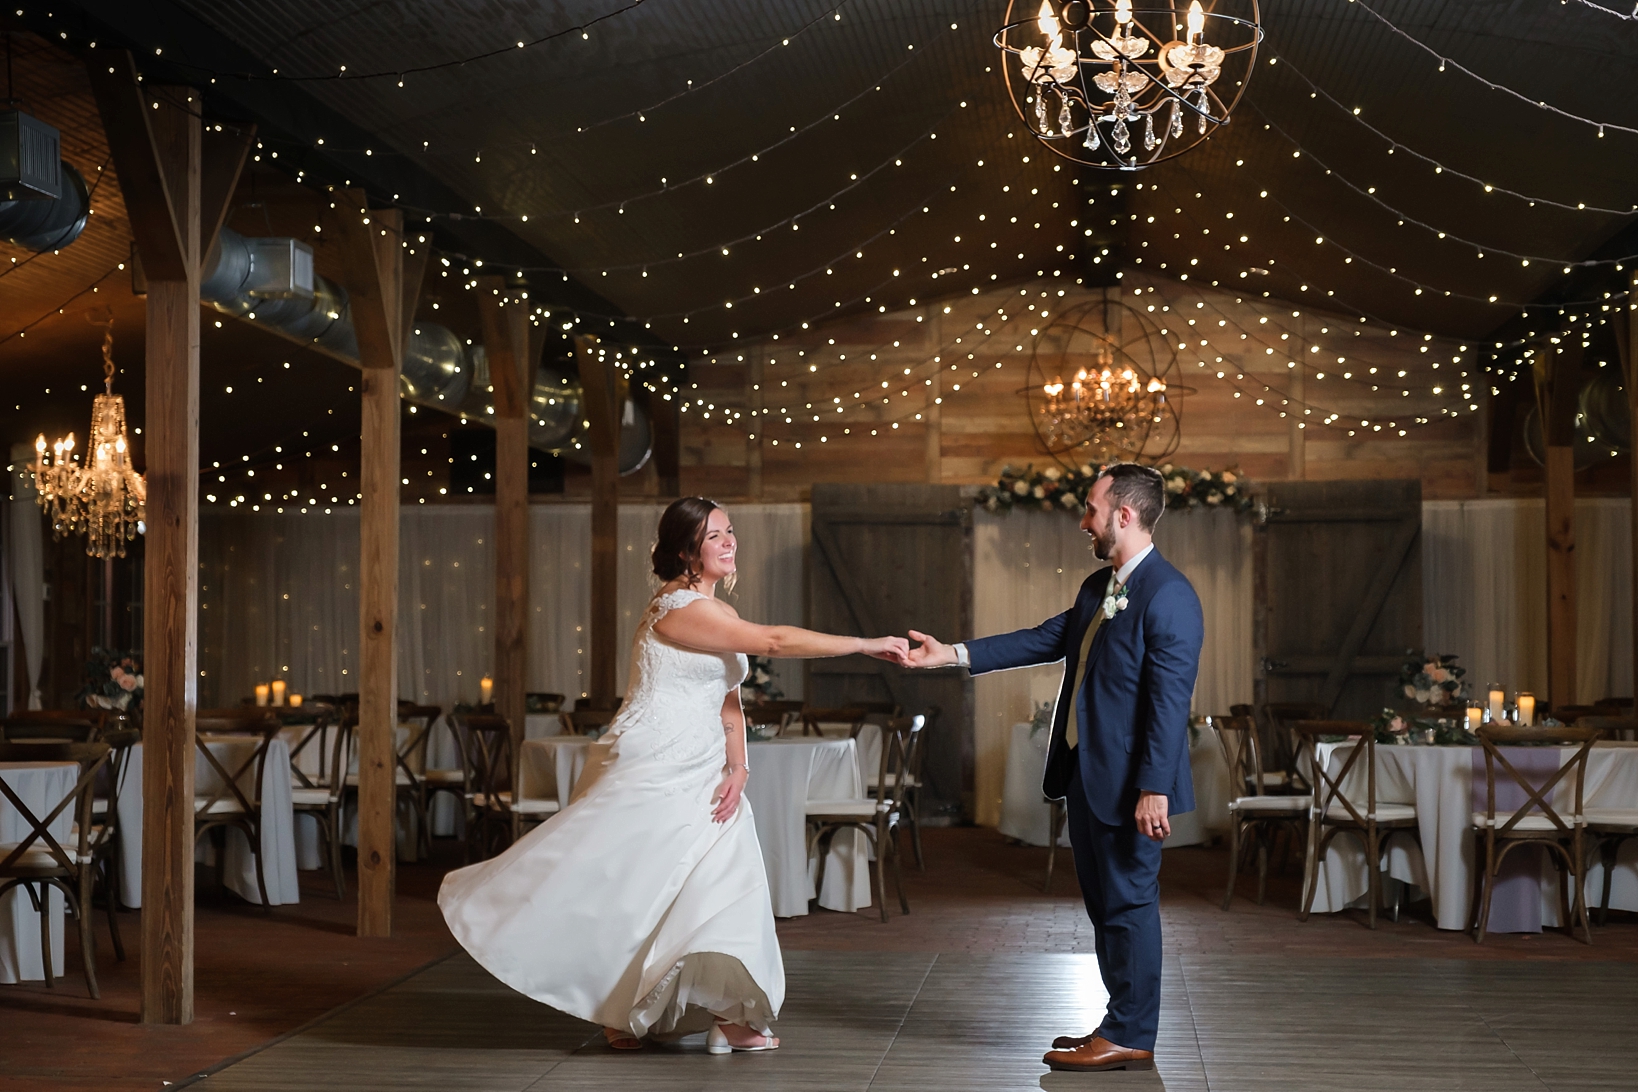 Bride and Groom share a quiet last dance together under the twinkle lights